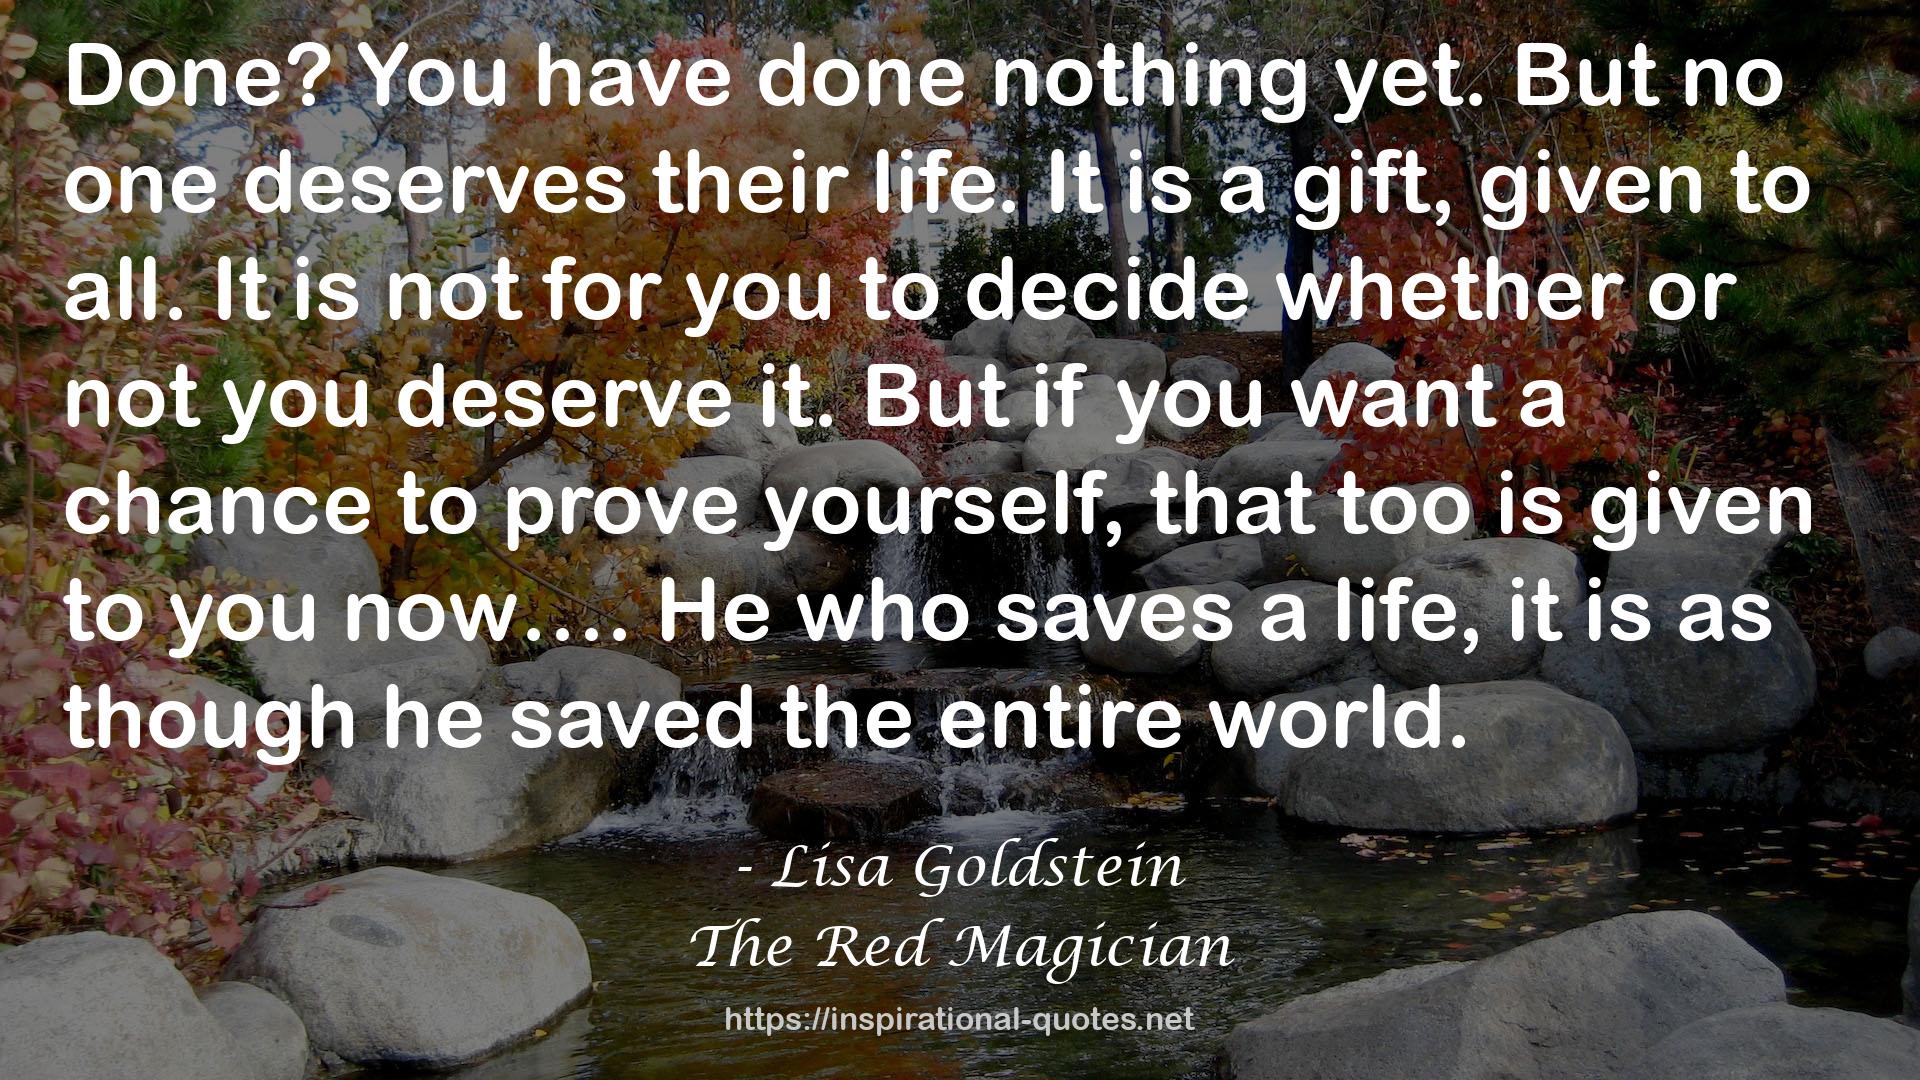 The Red Magician QUOTES